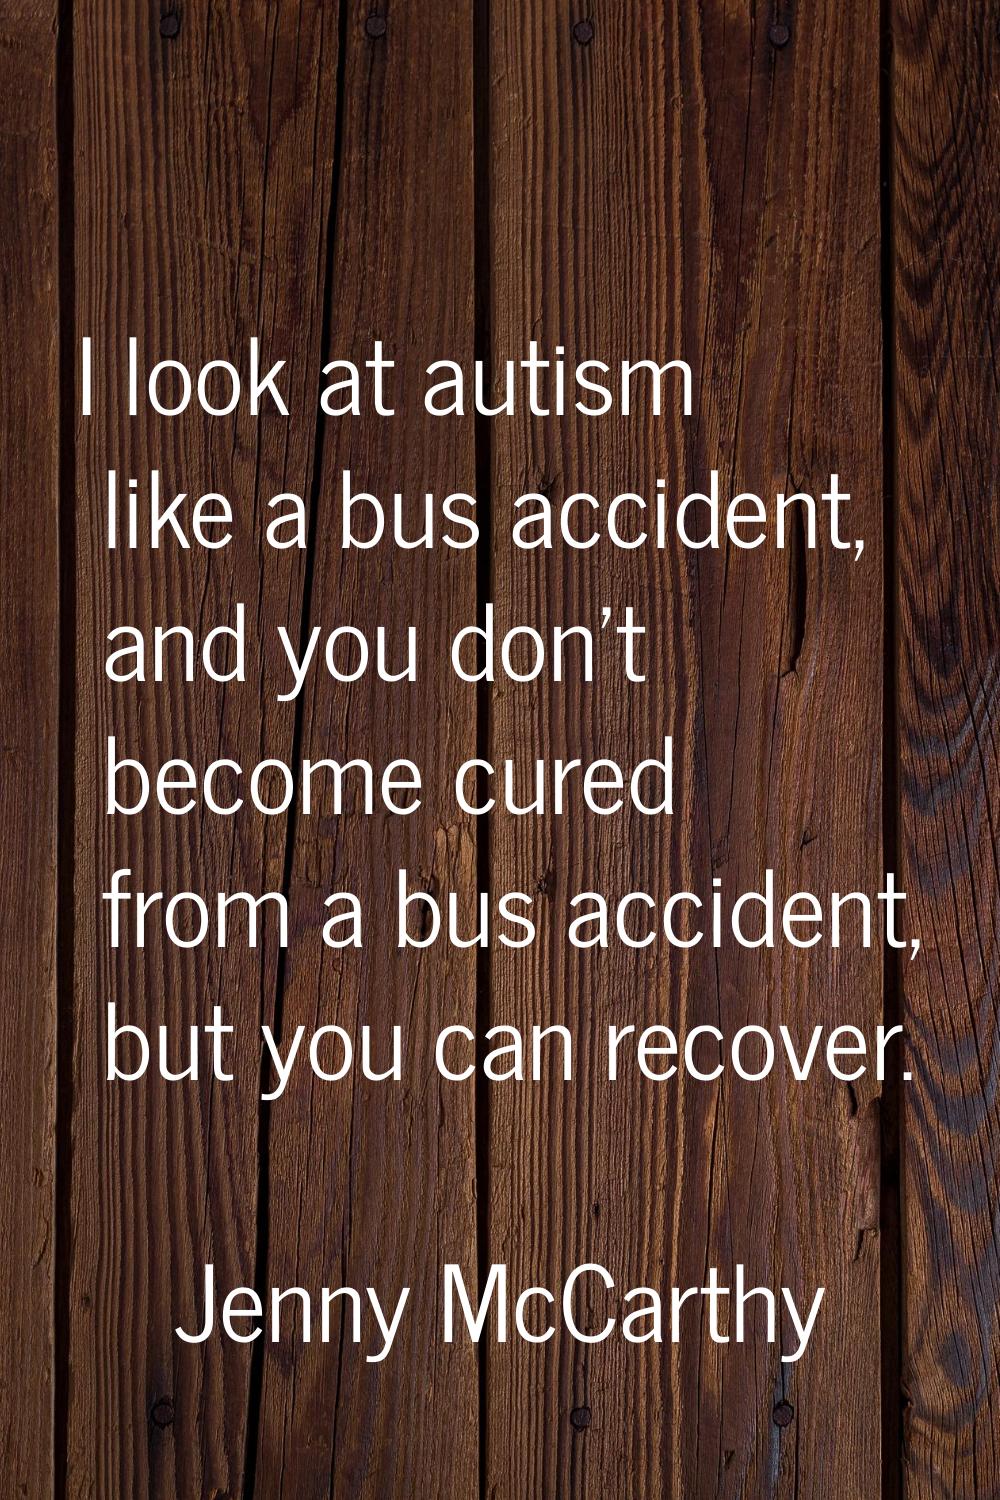 I look at autism like a bus accident, and you don't become cured from a bus accident, but you can r